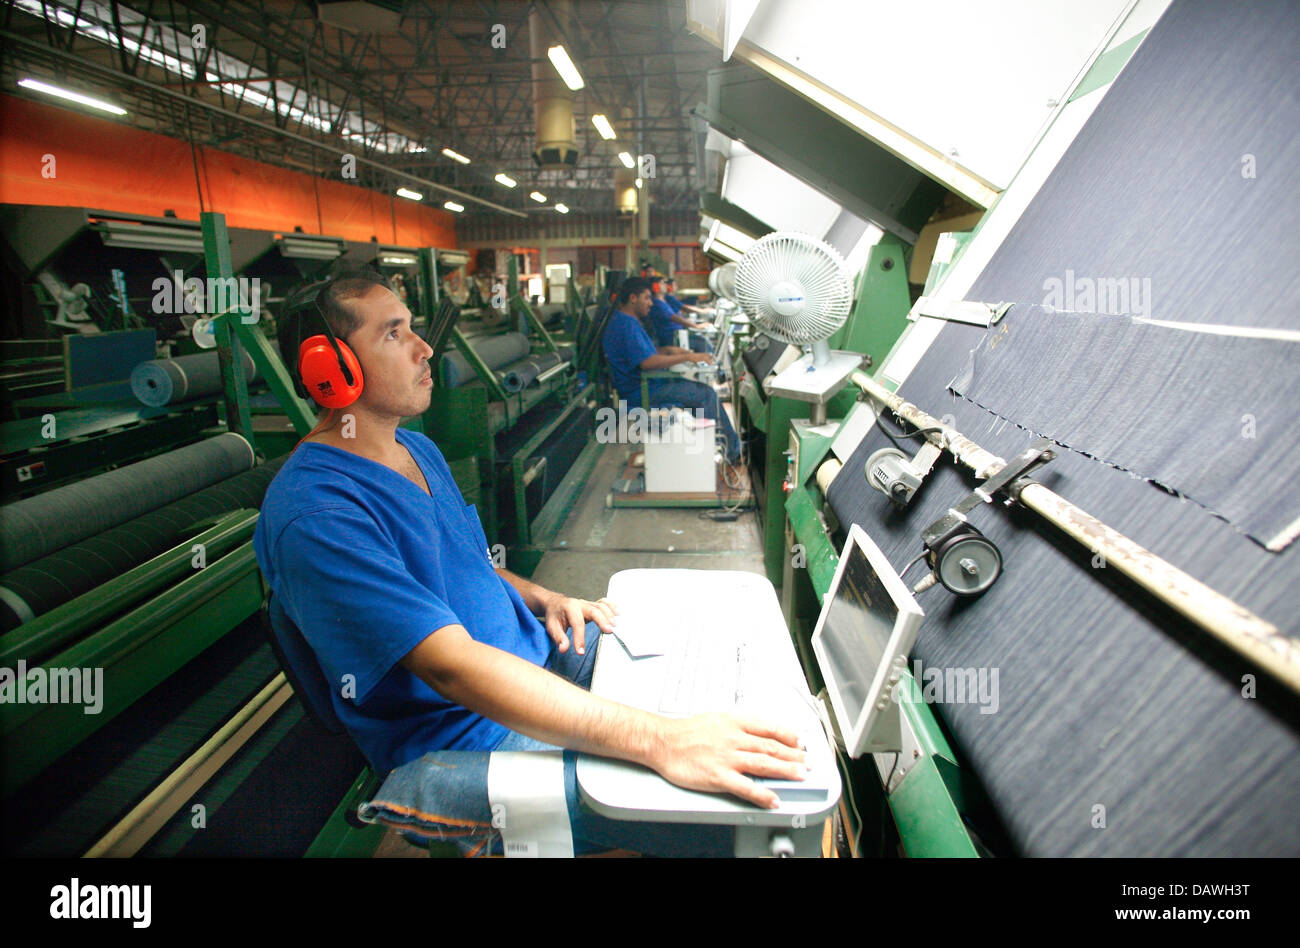 Workers operate machines at the Jeans factory Santana in Fortaleza, Brazil, 11 April 2007. Photo: Soeren Stache Stock Photo